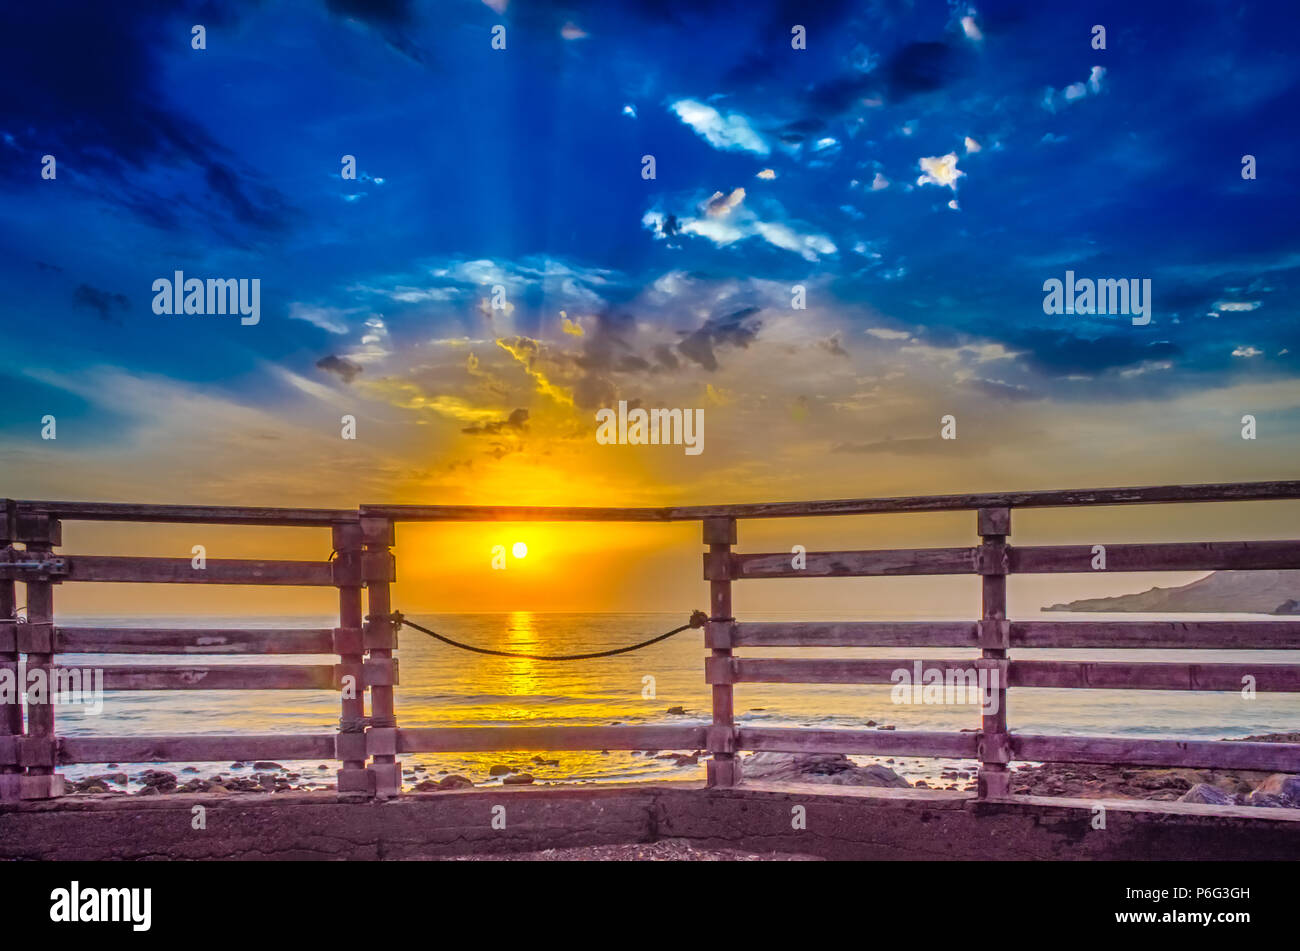 Welcoming a new day from the lawn of an old beach house. Stock Photo